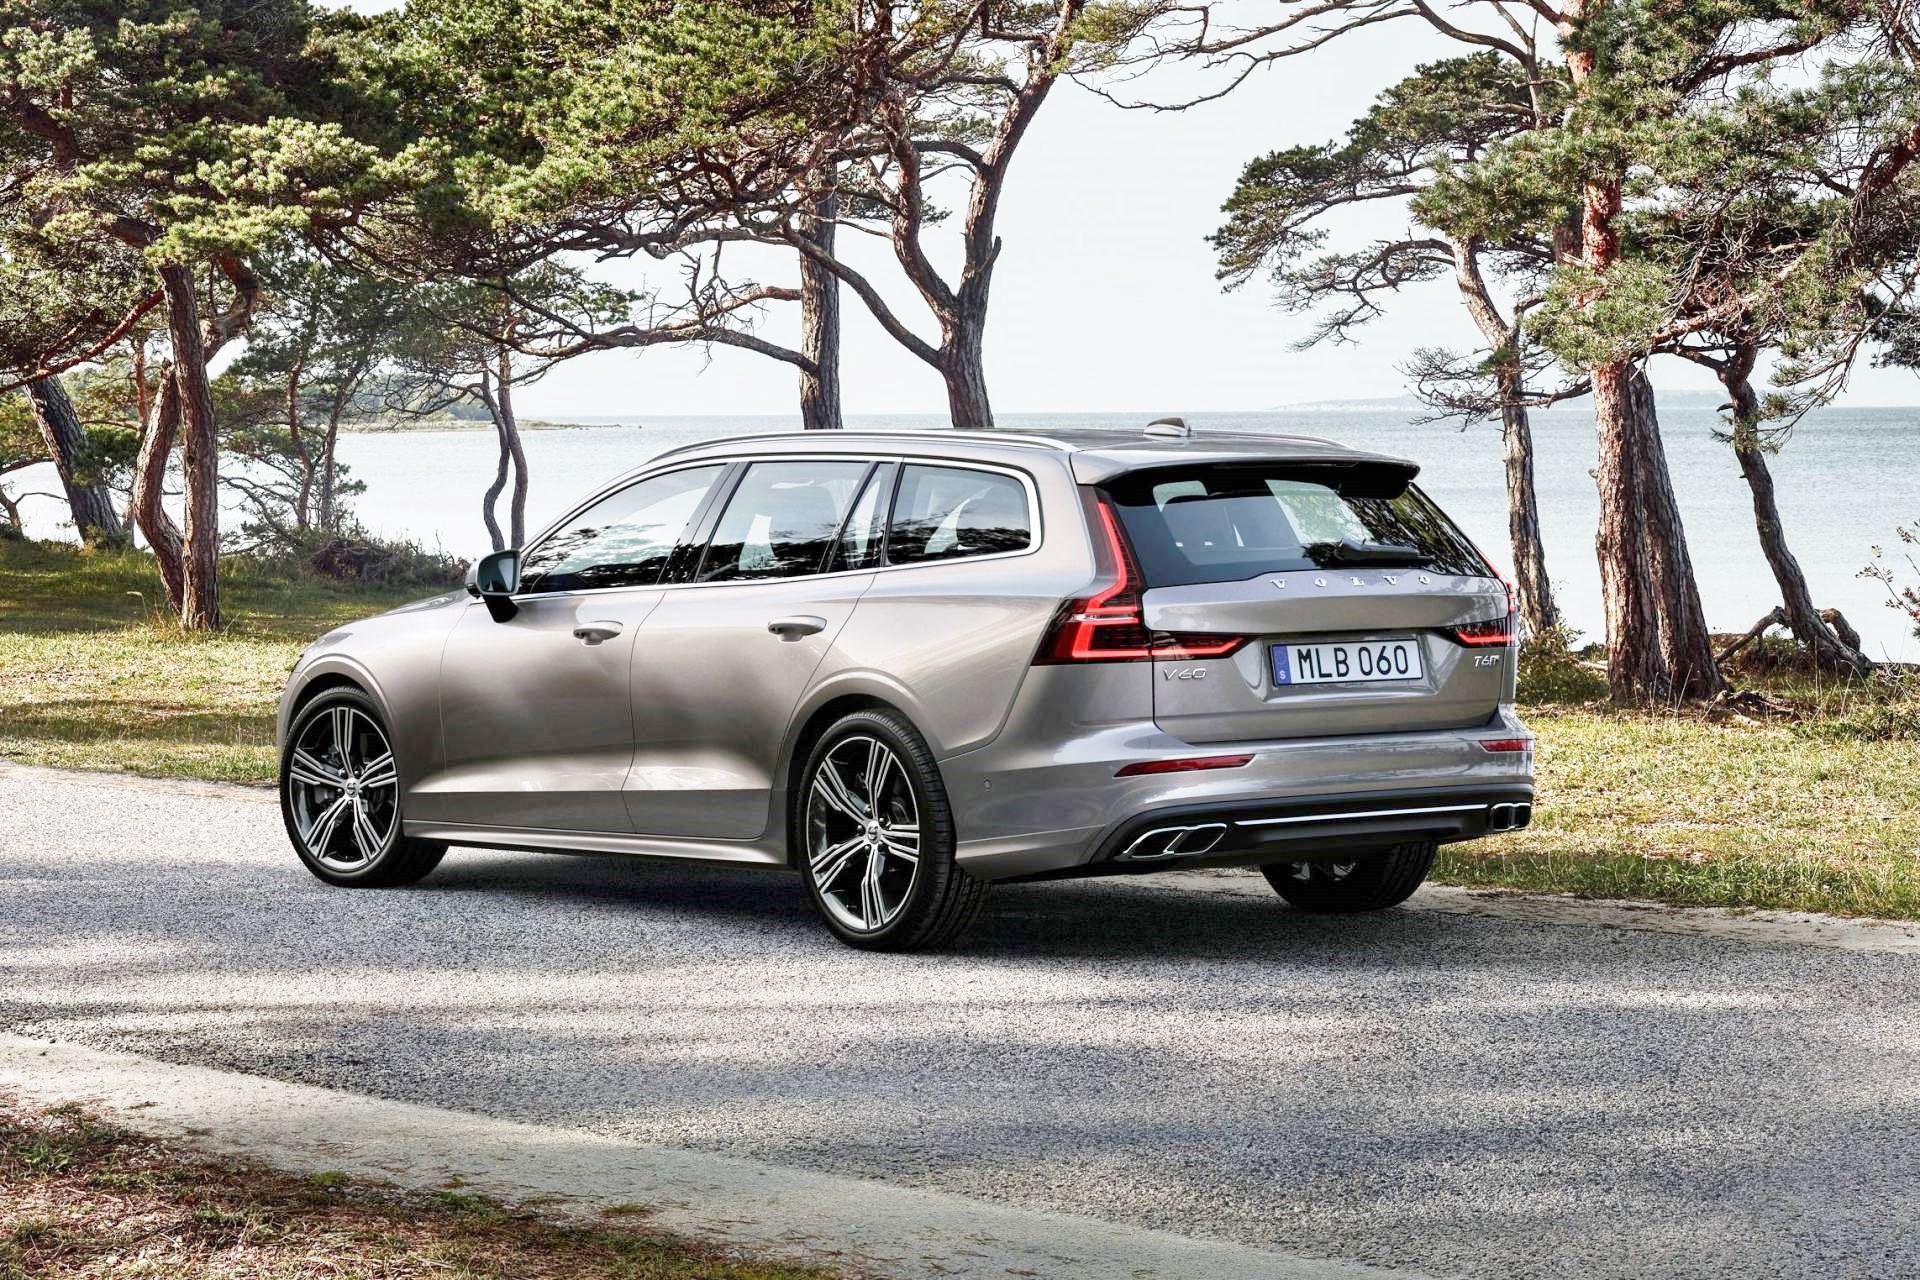 Volvo-V60-2019-lai-phe-voi-dong-co-tang-ap-2-0-L-anh-2